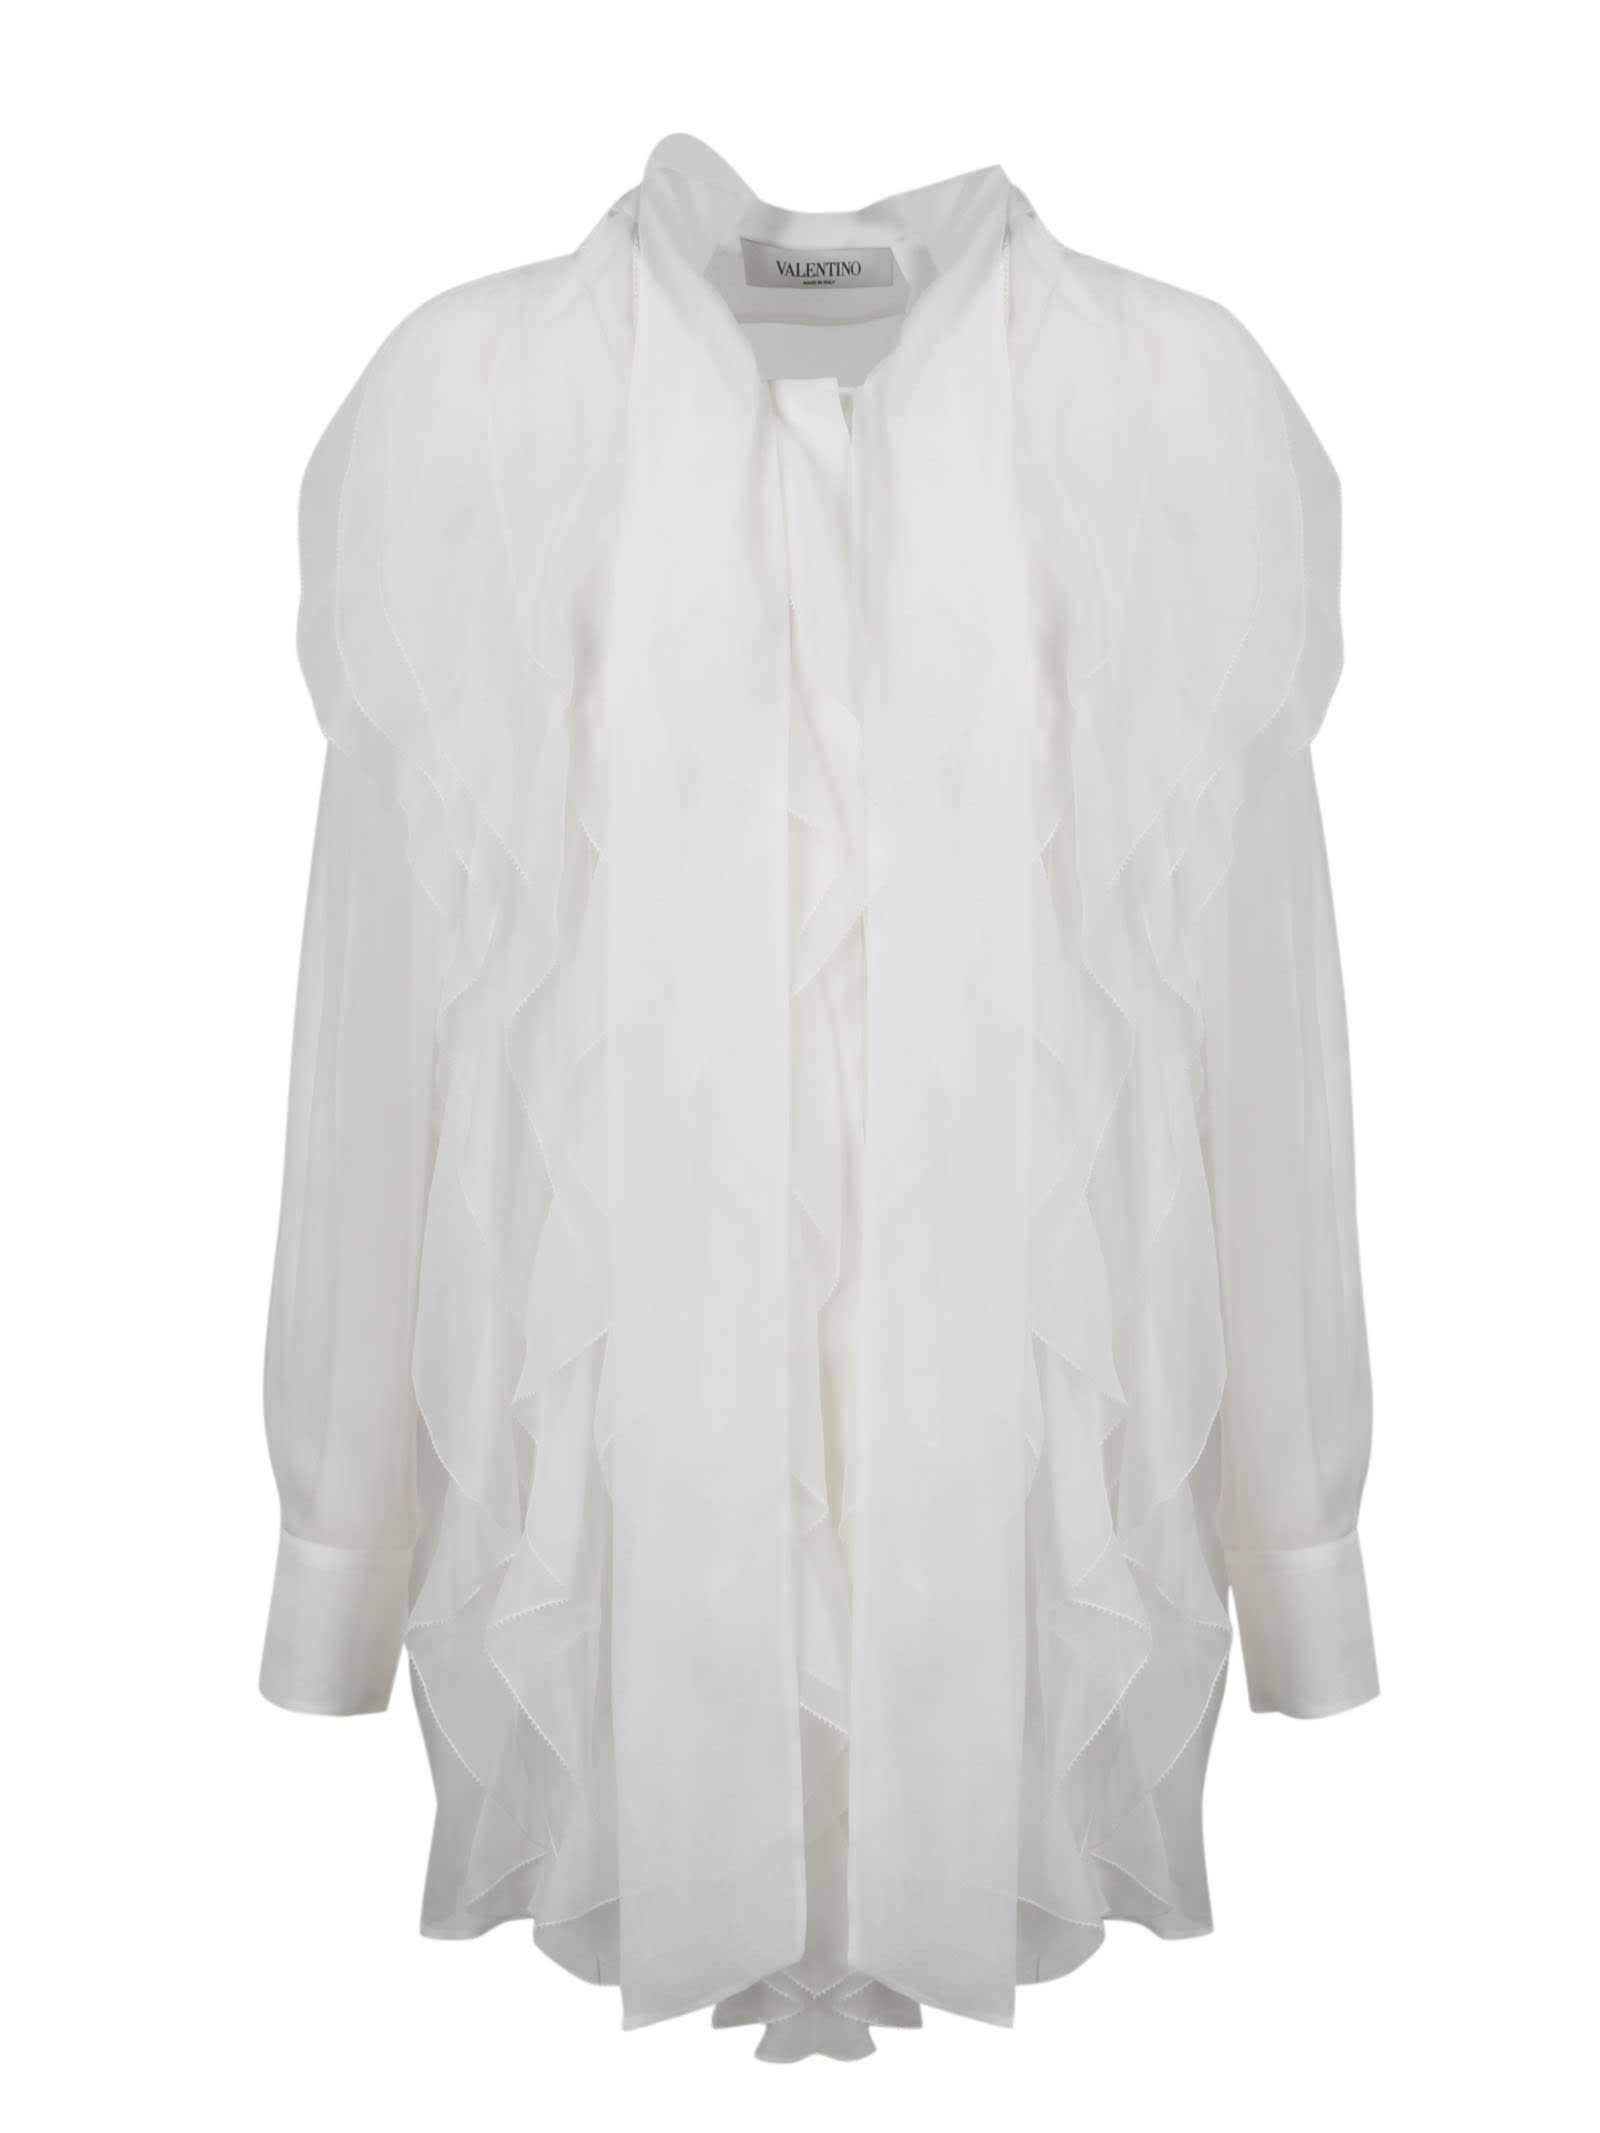 VALENTINO SHIRT WITH ROUCHES,VB0AB2F02UP A03